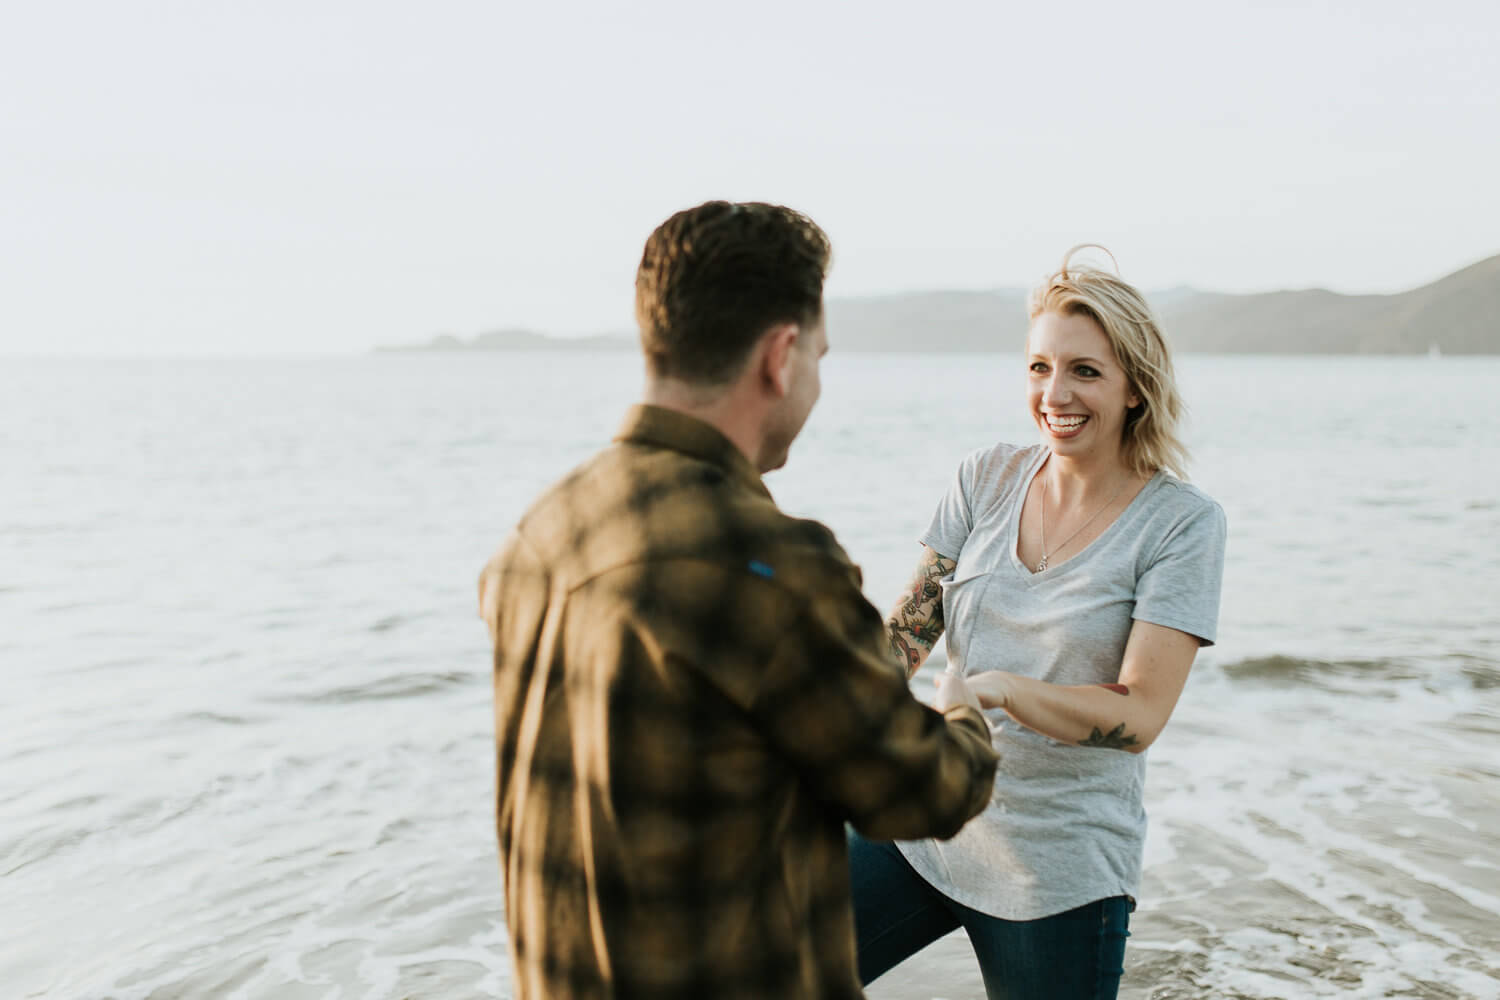 This Baker Beach Engagement shoot was so fun, candid, and natural.